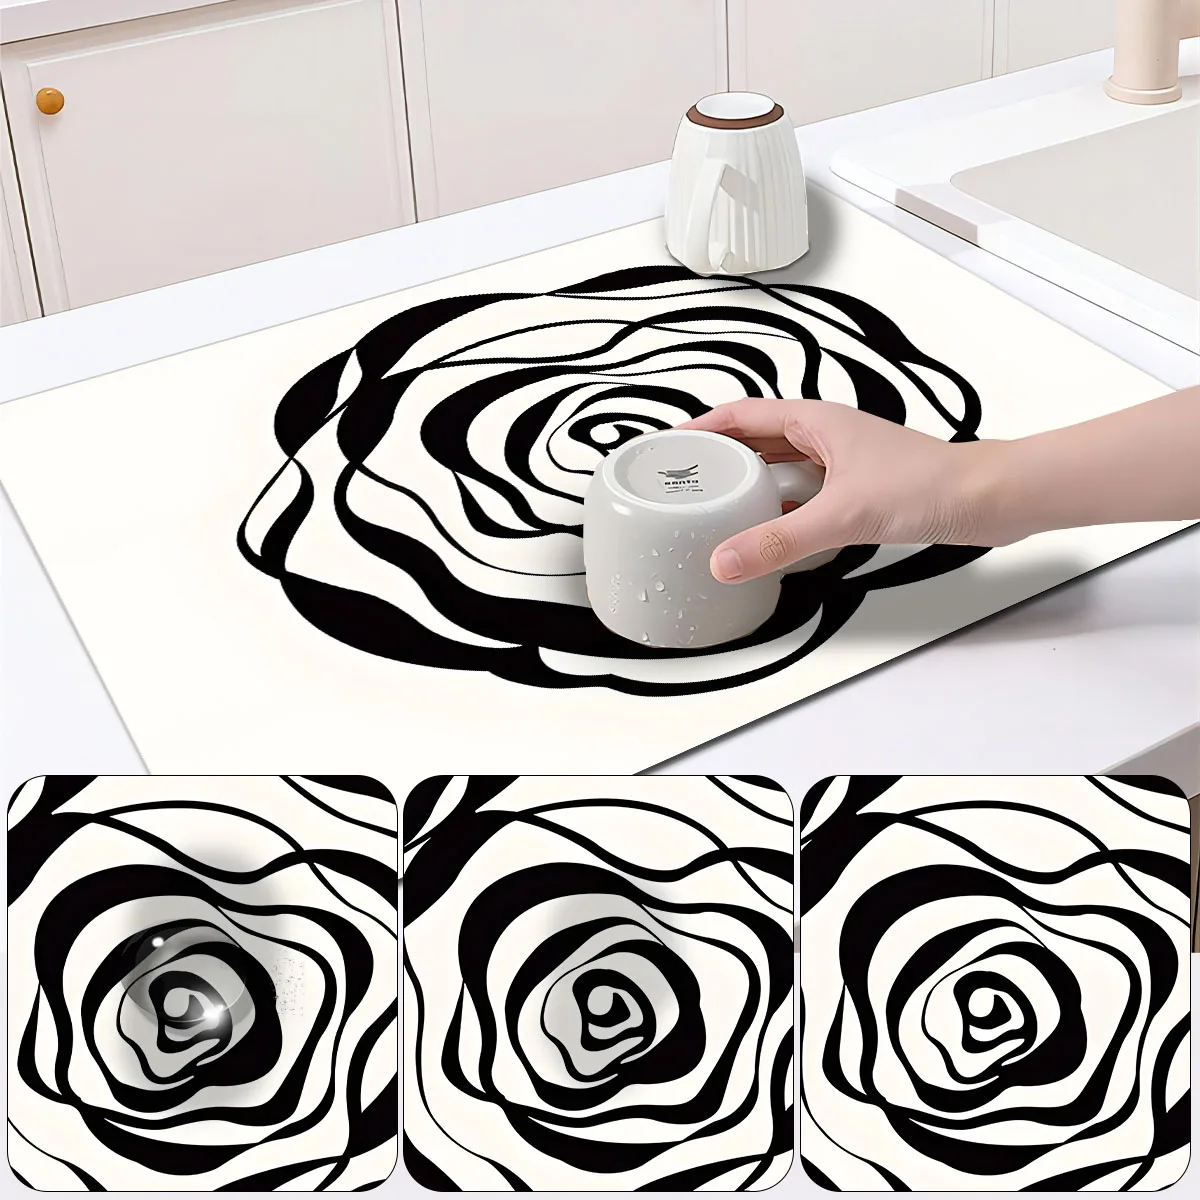 https://ae01.alicdn.com/kf/Sf2f2612cea5a4e82a3c5bb115eacdafao/1pc-retro-coffee-patterns-moisture-proof-absorbent-coffee-pads-coffee-bar-accessories-rubber-absorbent-dishwashing-pads.jpg